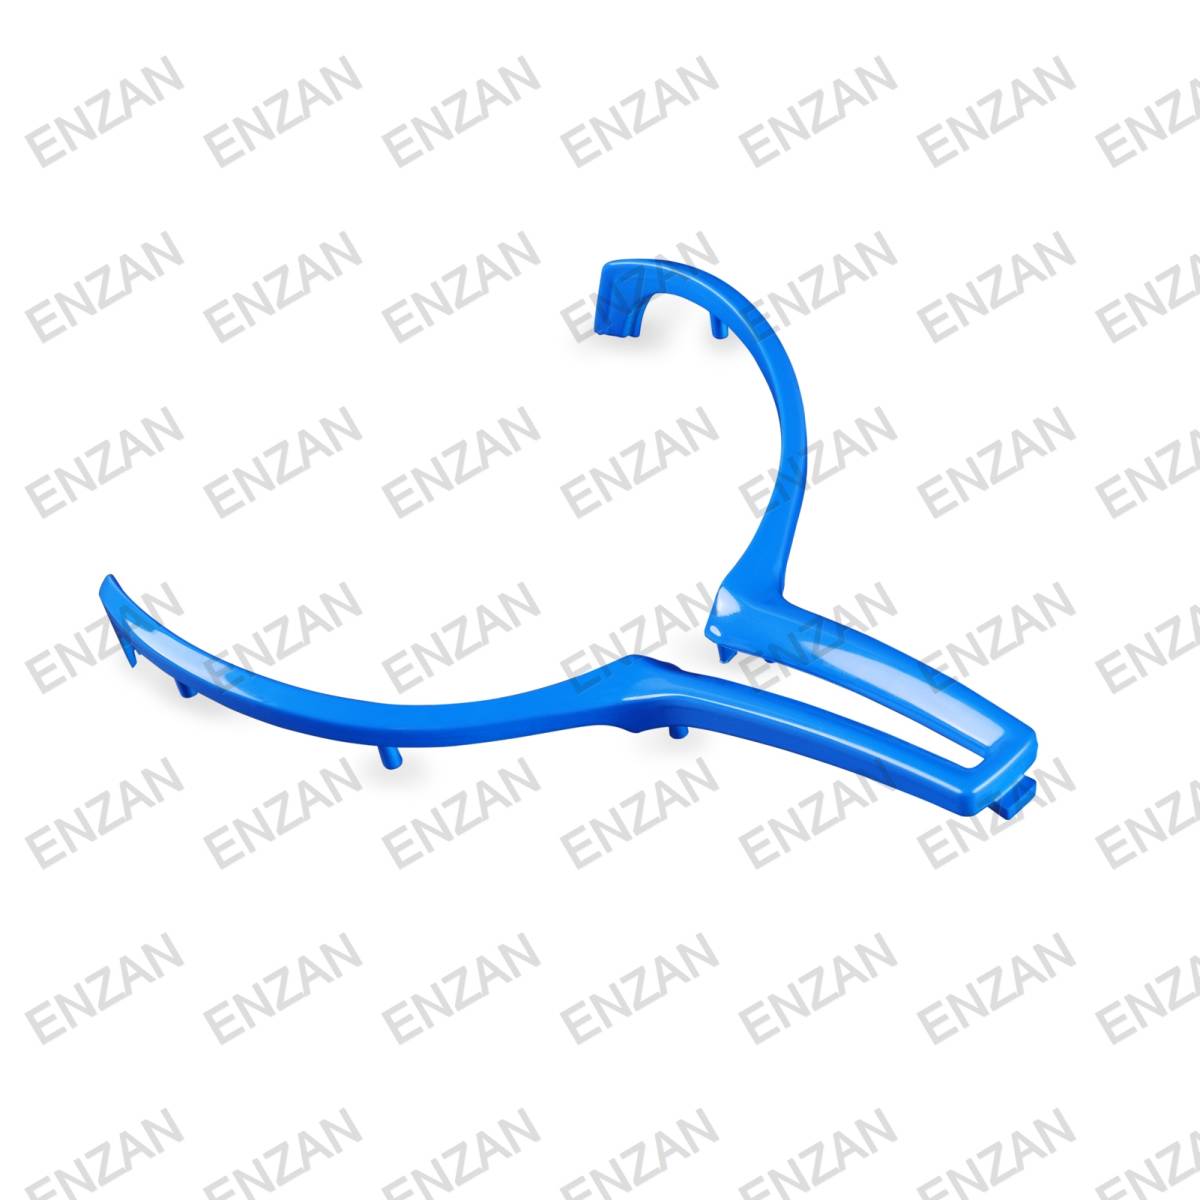 BMW M2 F87 F80 M3 F82 M4 F10 M5 F06 F12 F13 M6 F15 X5M F16 X6M steering gear trim / steering wheel cover ABS made blue color 